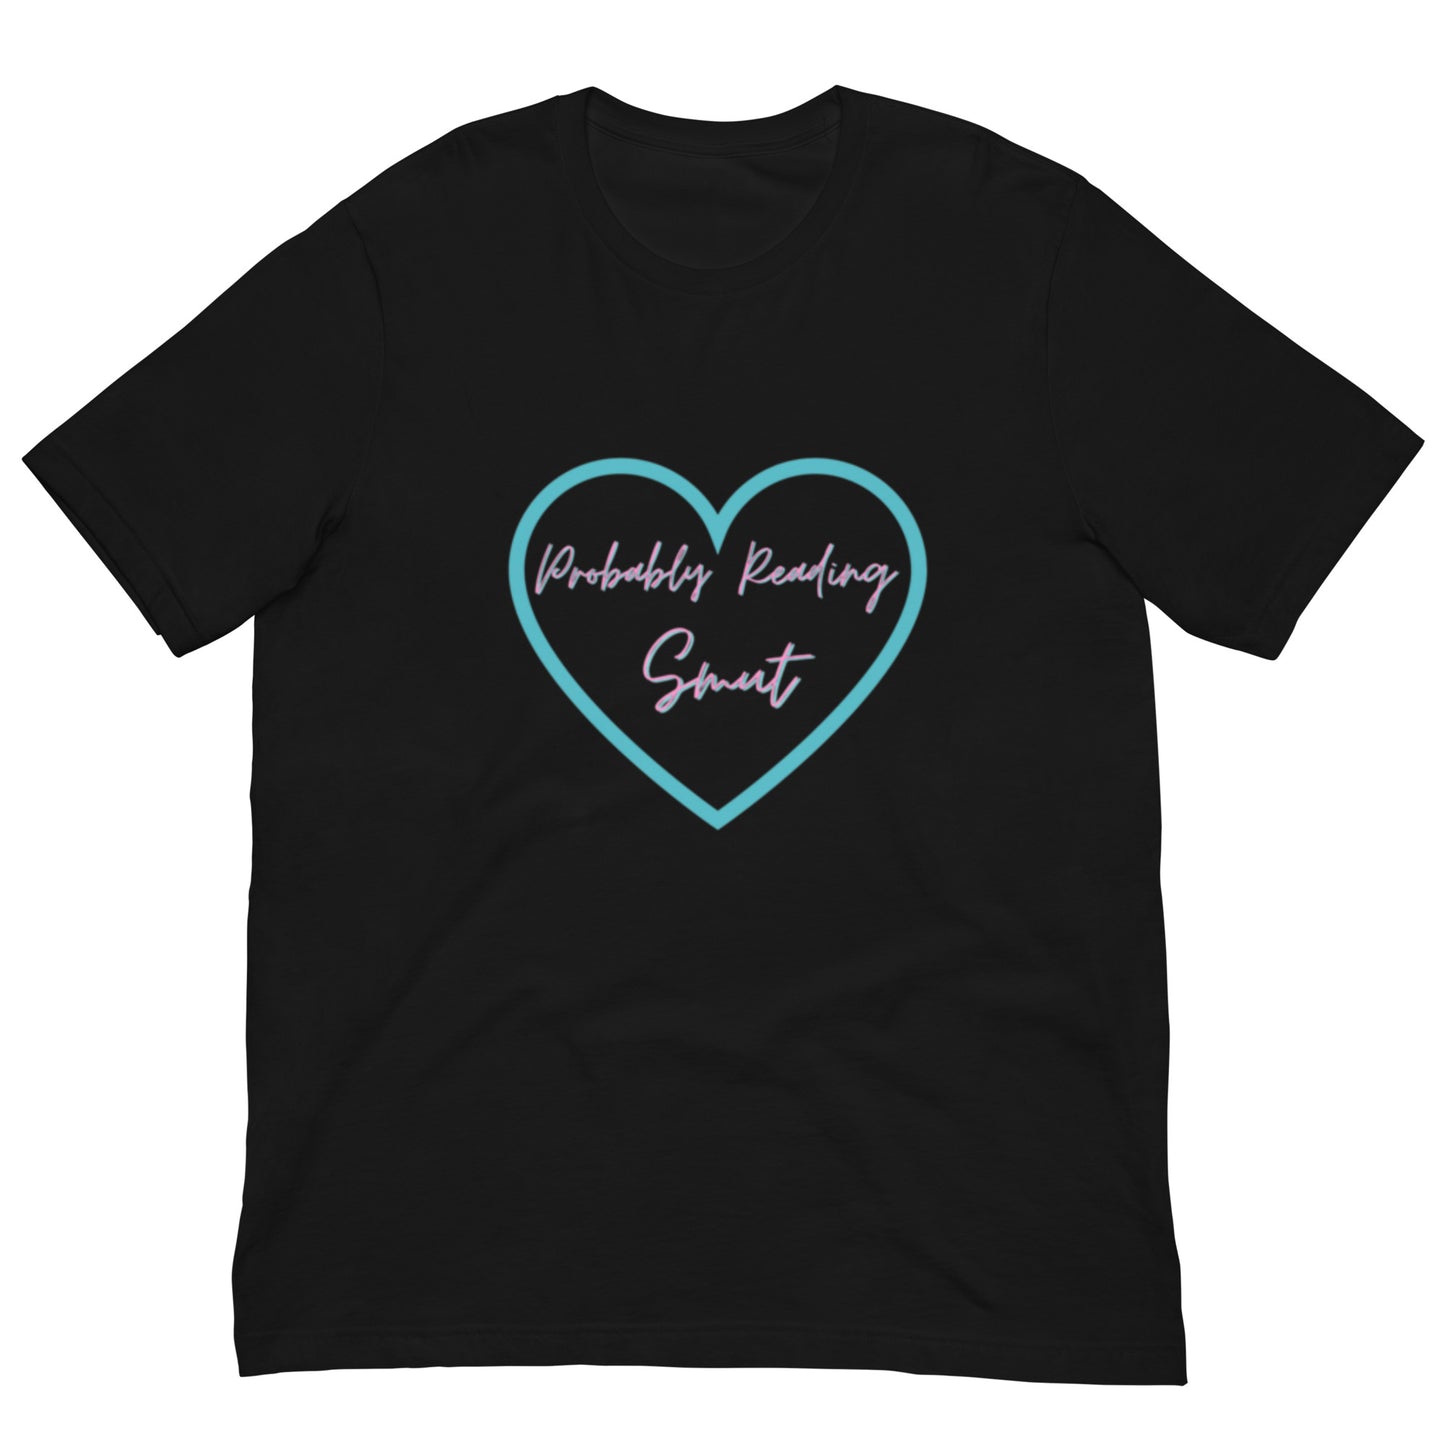 Probably Reading Smut (Pink & Teal) Unisex T-Shirt - The Spinster Librarian Shop